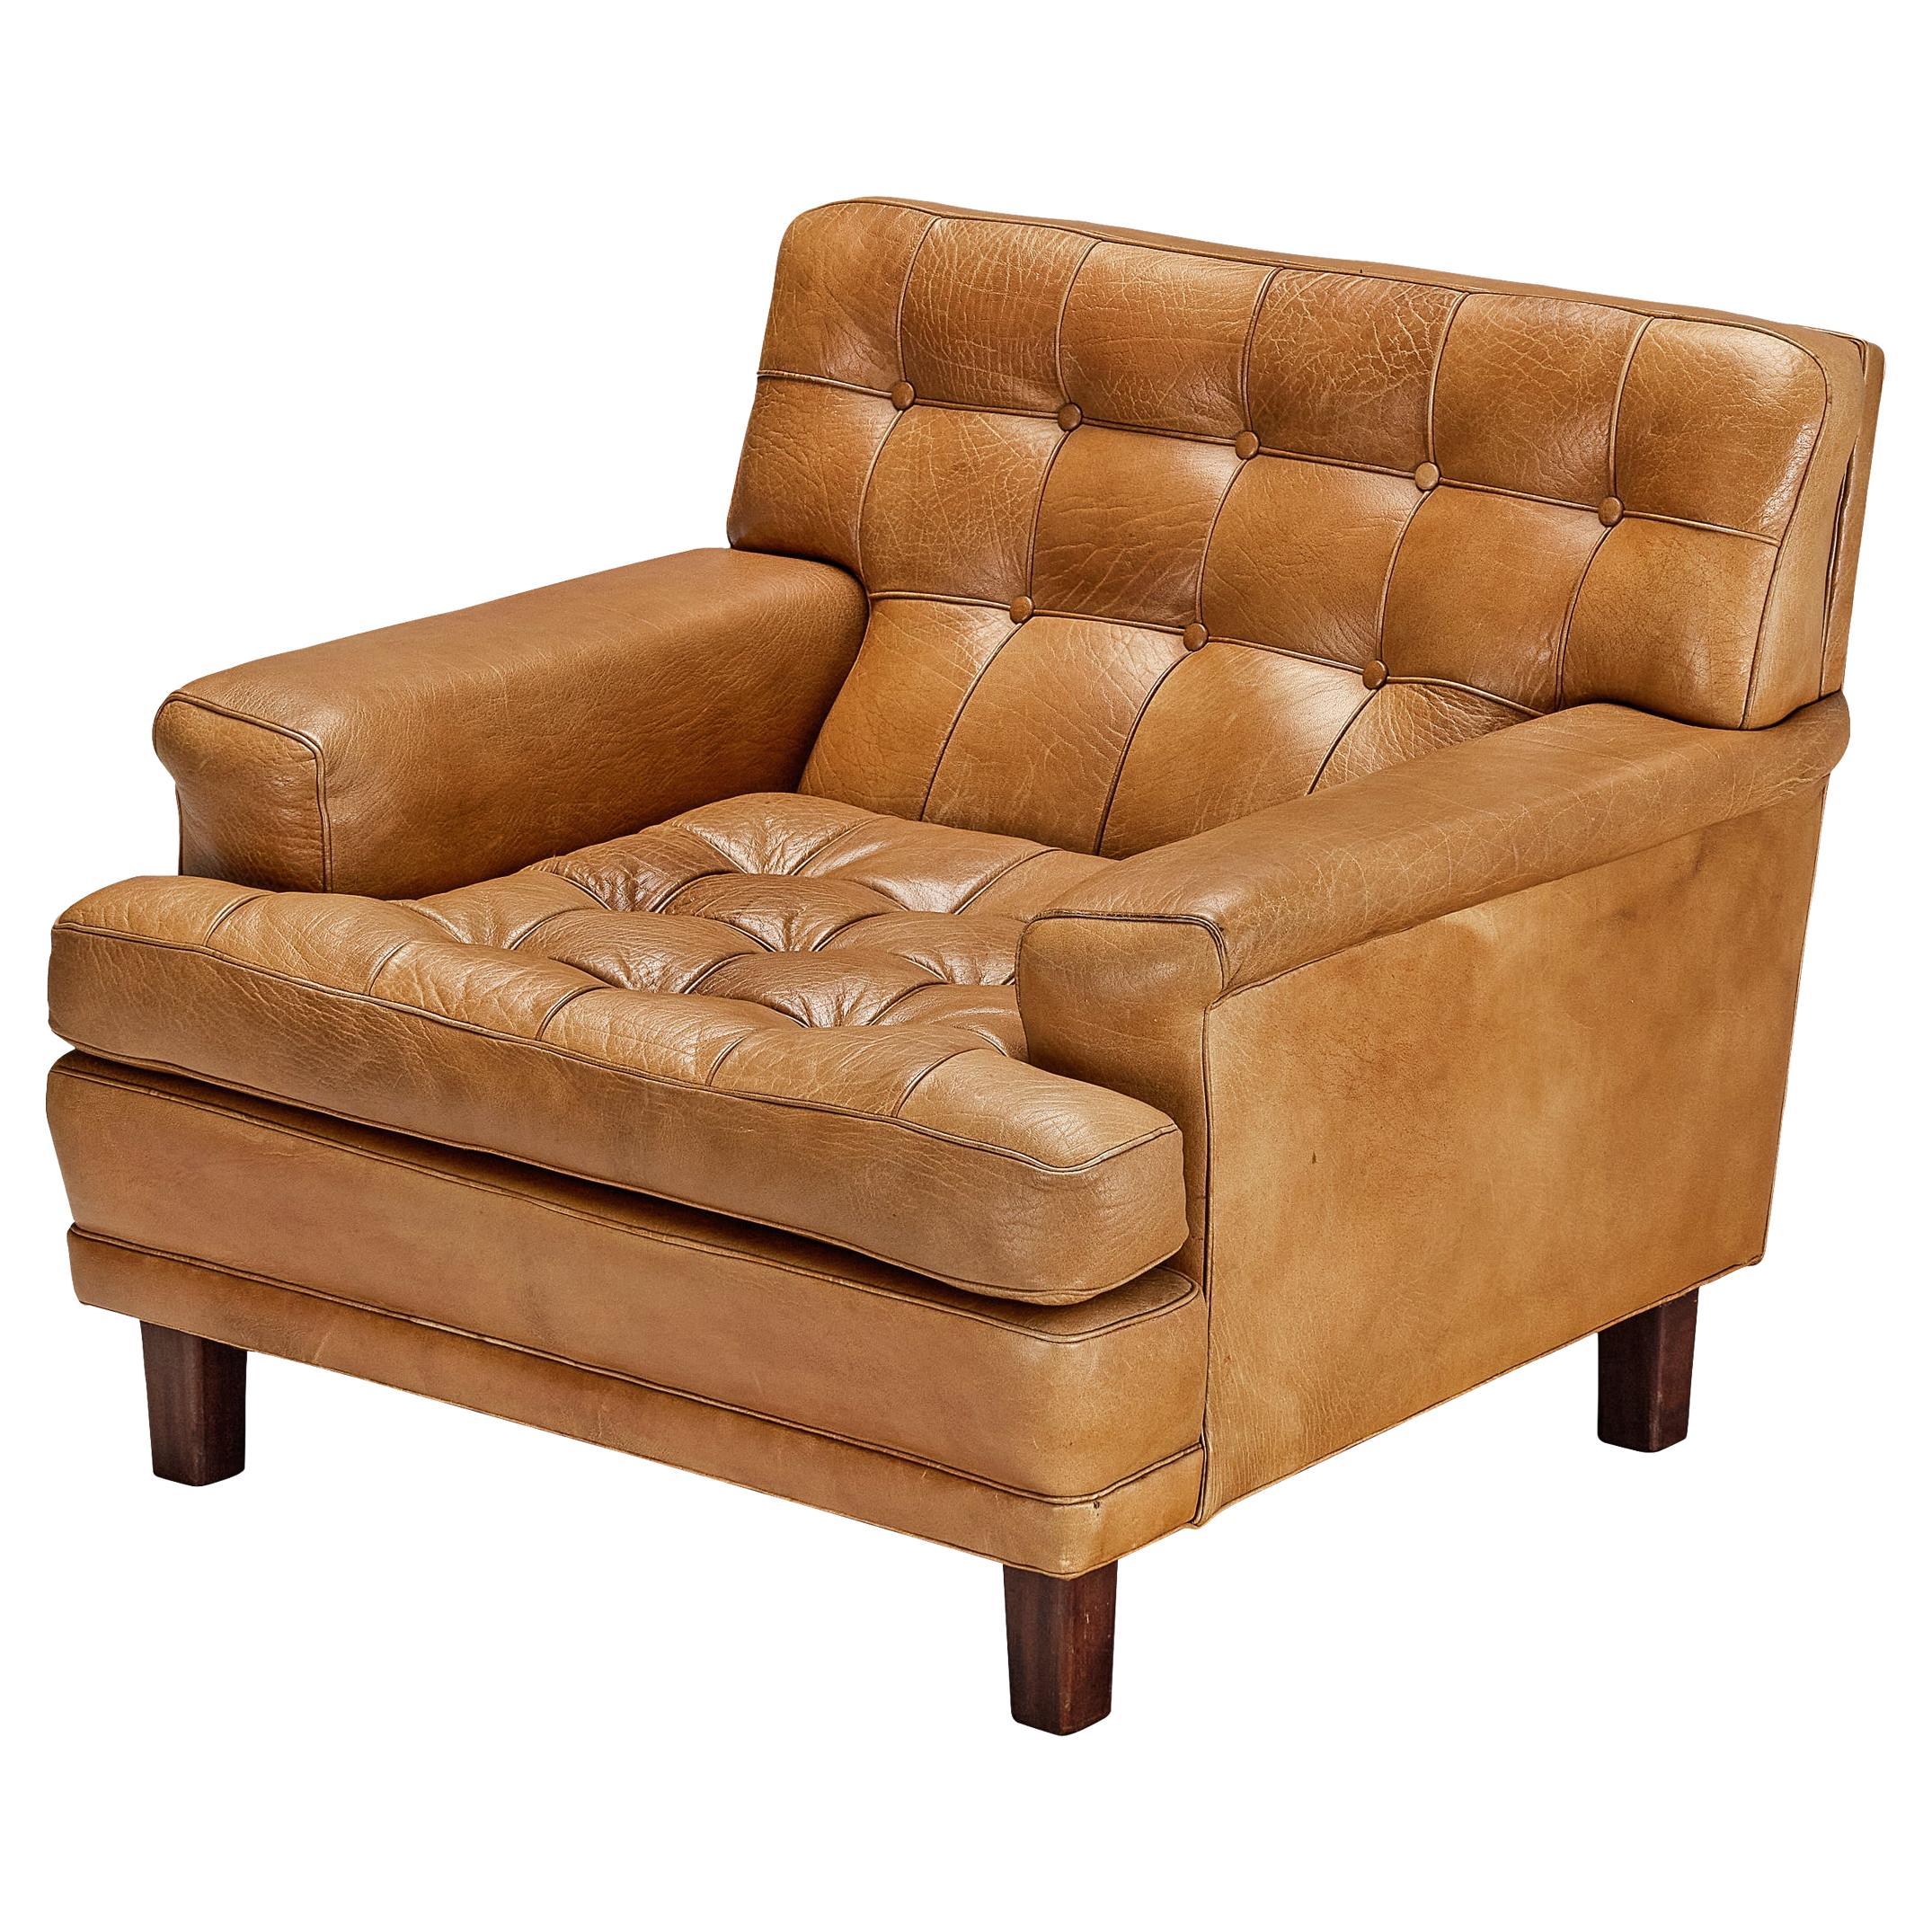 Arne Norell 'Merkur' Lounge Chair in Cognac Leather and Mahogany  For Sale